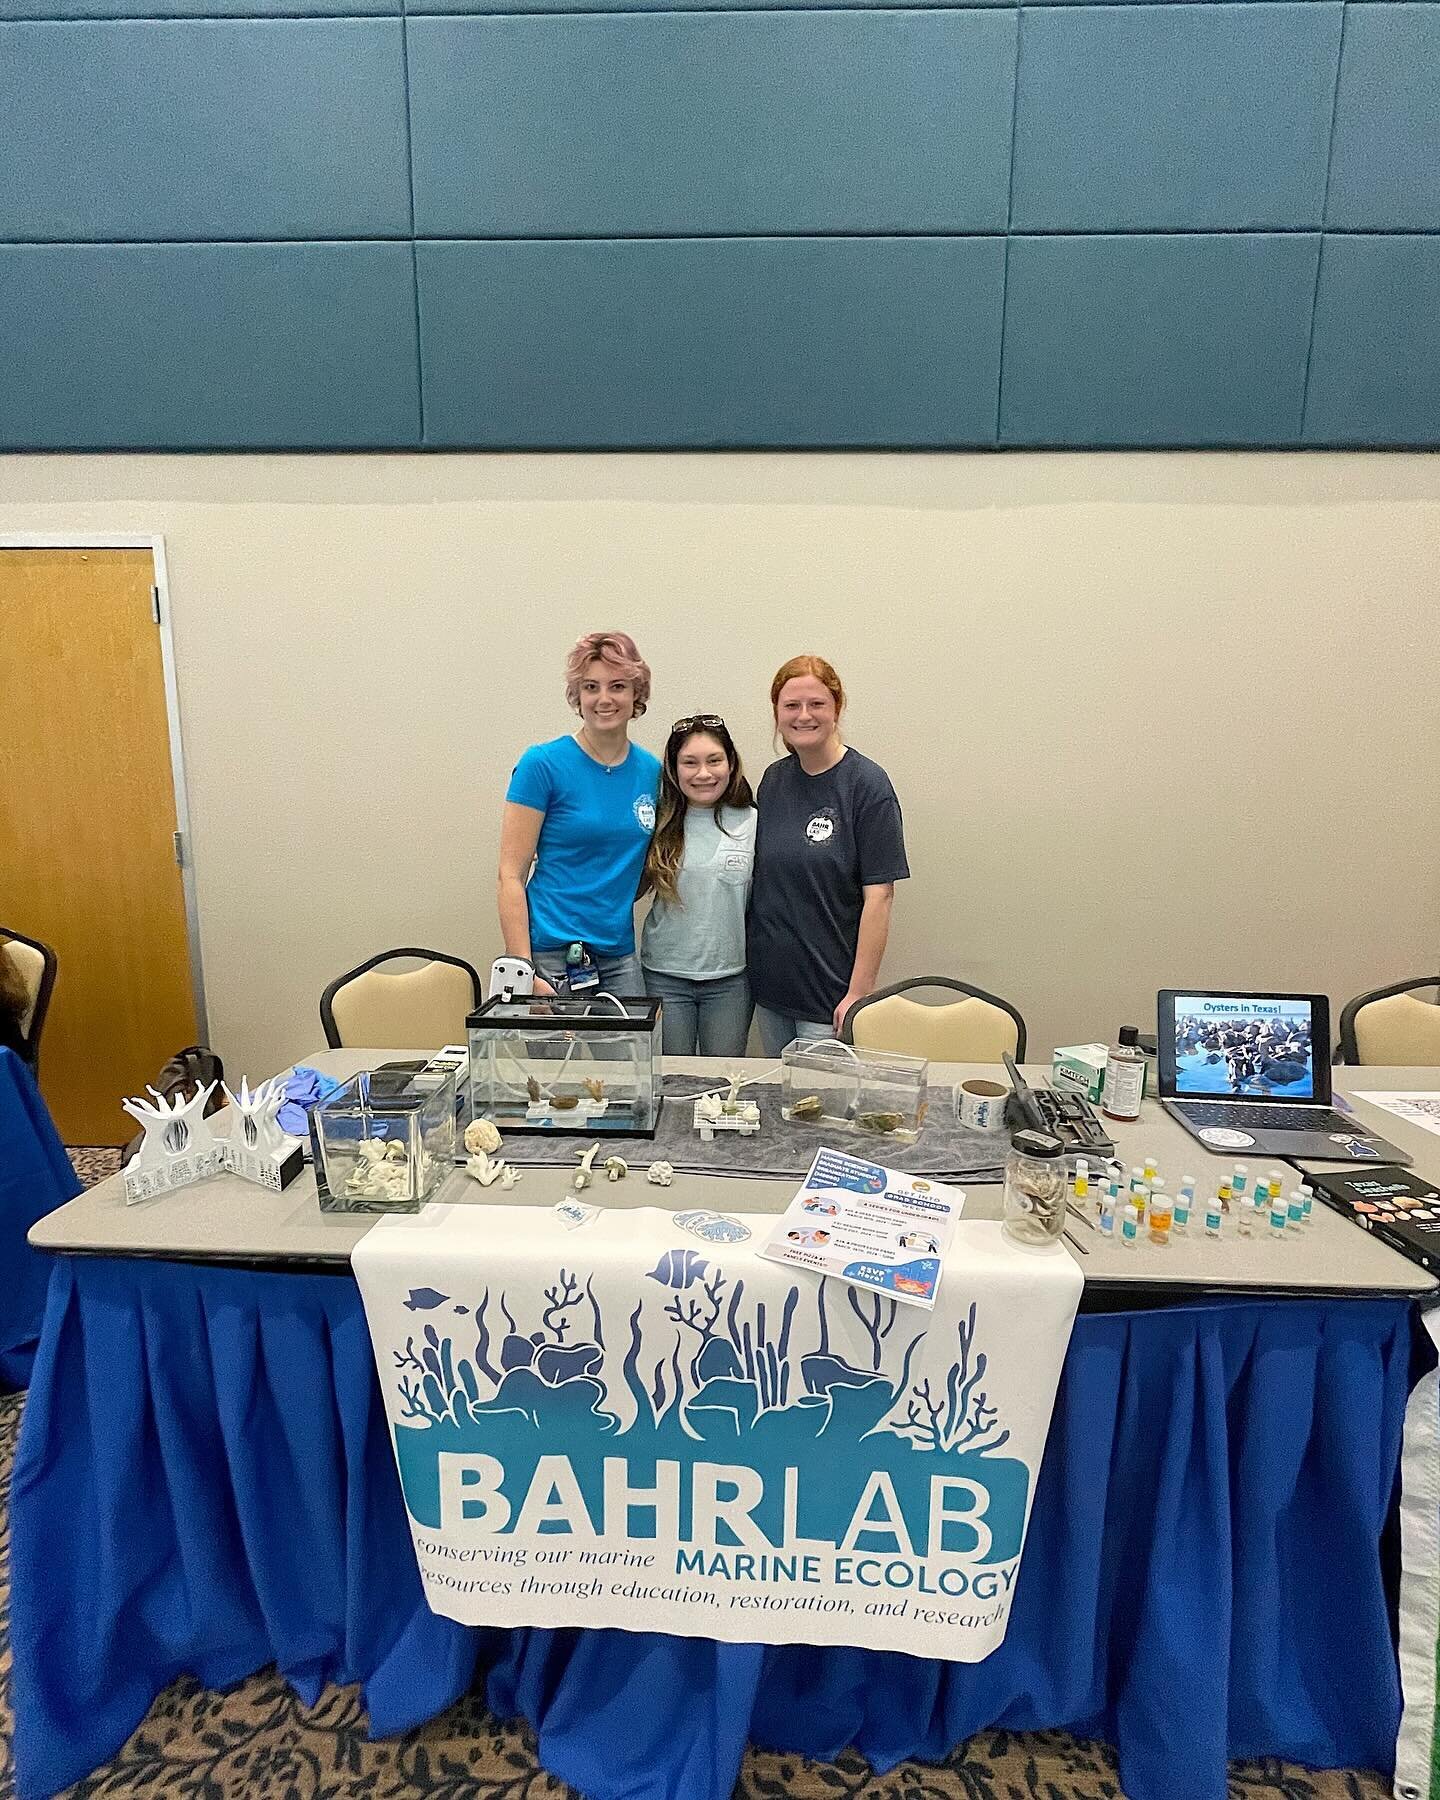 🔬✨ Texas A&amp;M University-Corpus Christi hosted its first International Day of Women in Science celebration. Here is a recap of the Bahr Lab&rsquo;s involvement:

Our table showcased a collaboration between the Bahr Lab, TXSWMS, MSGSO, and TAMUCC 